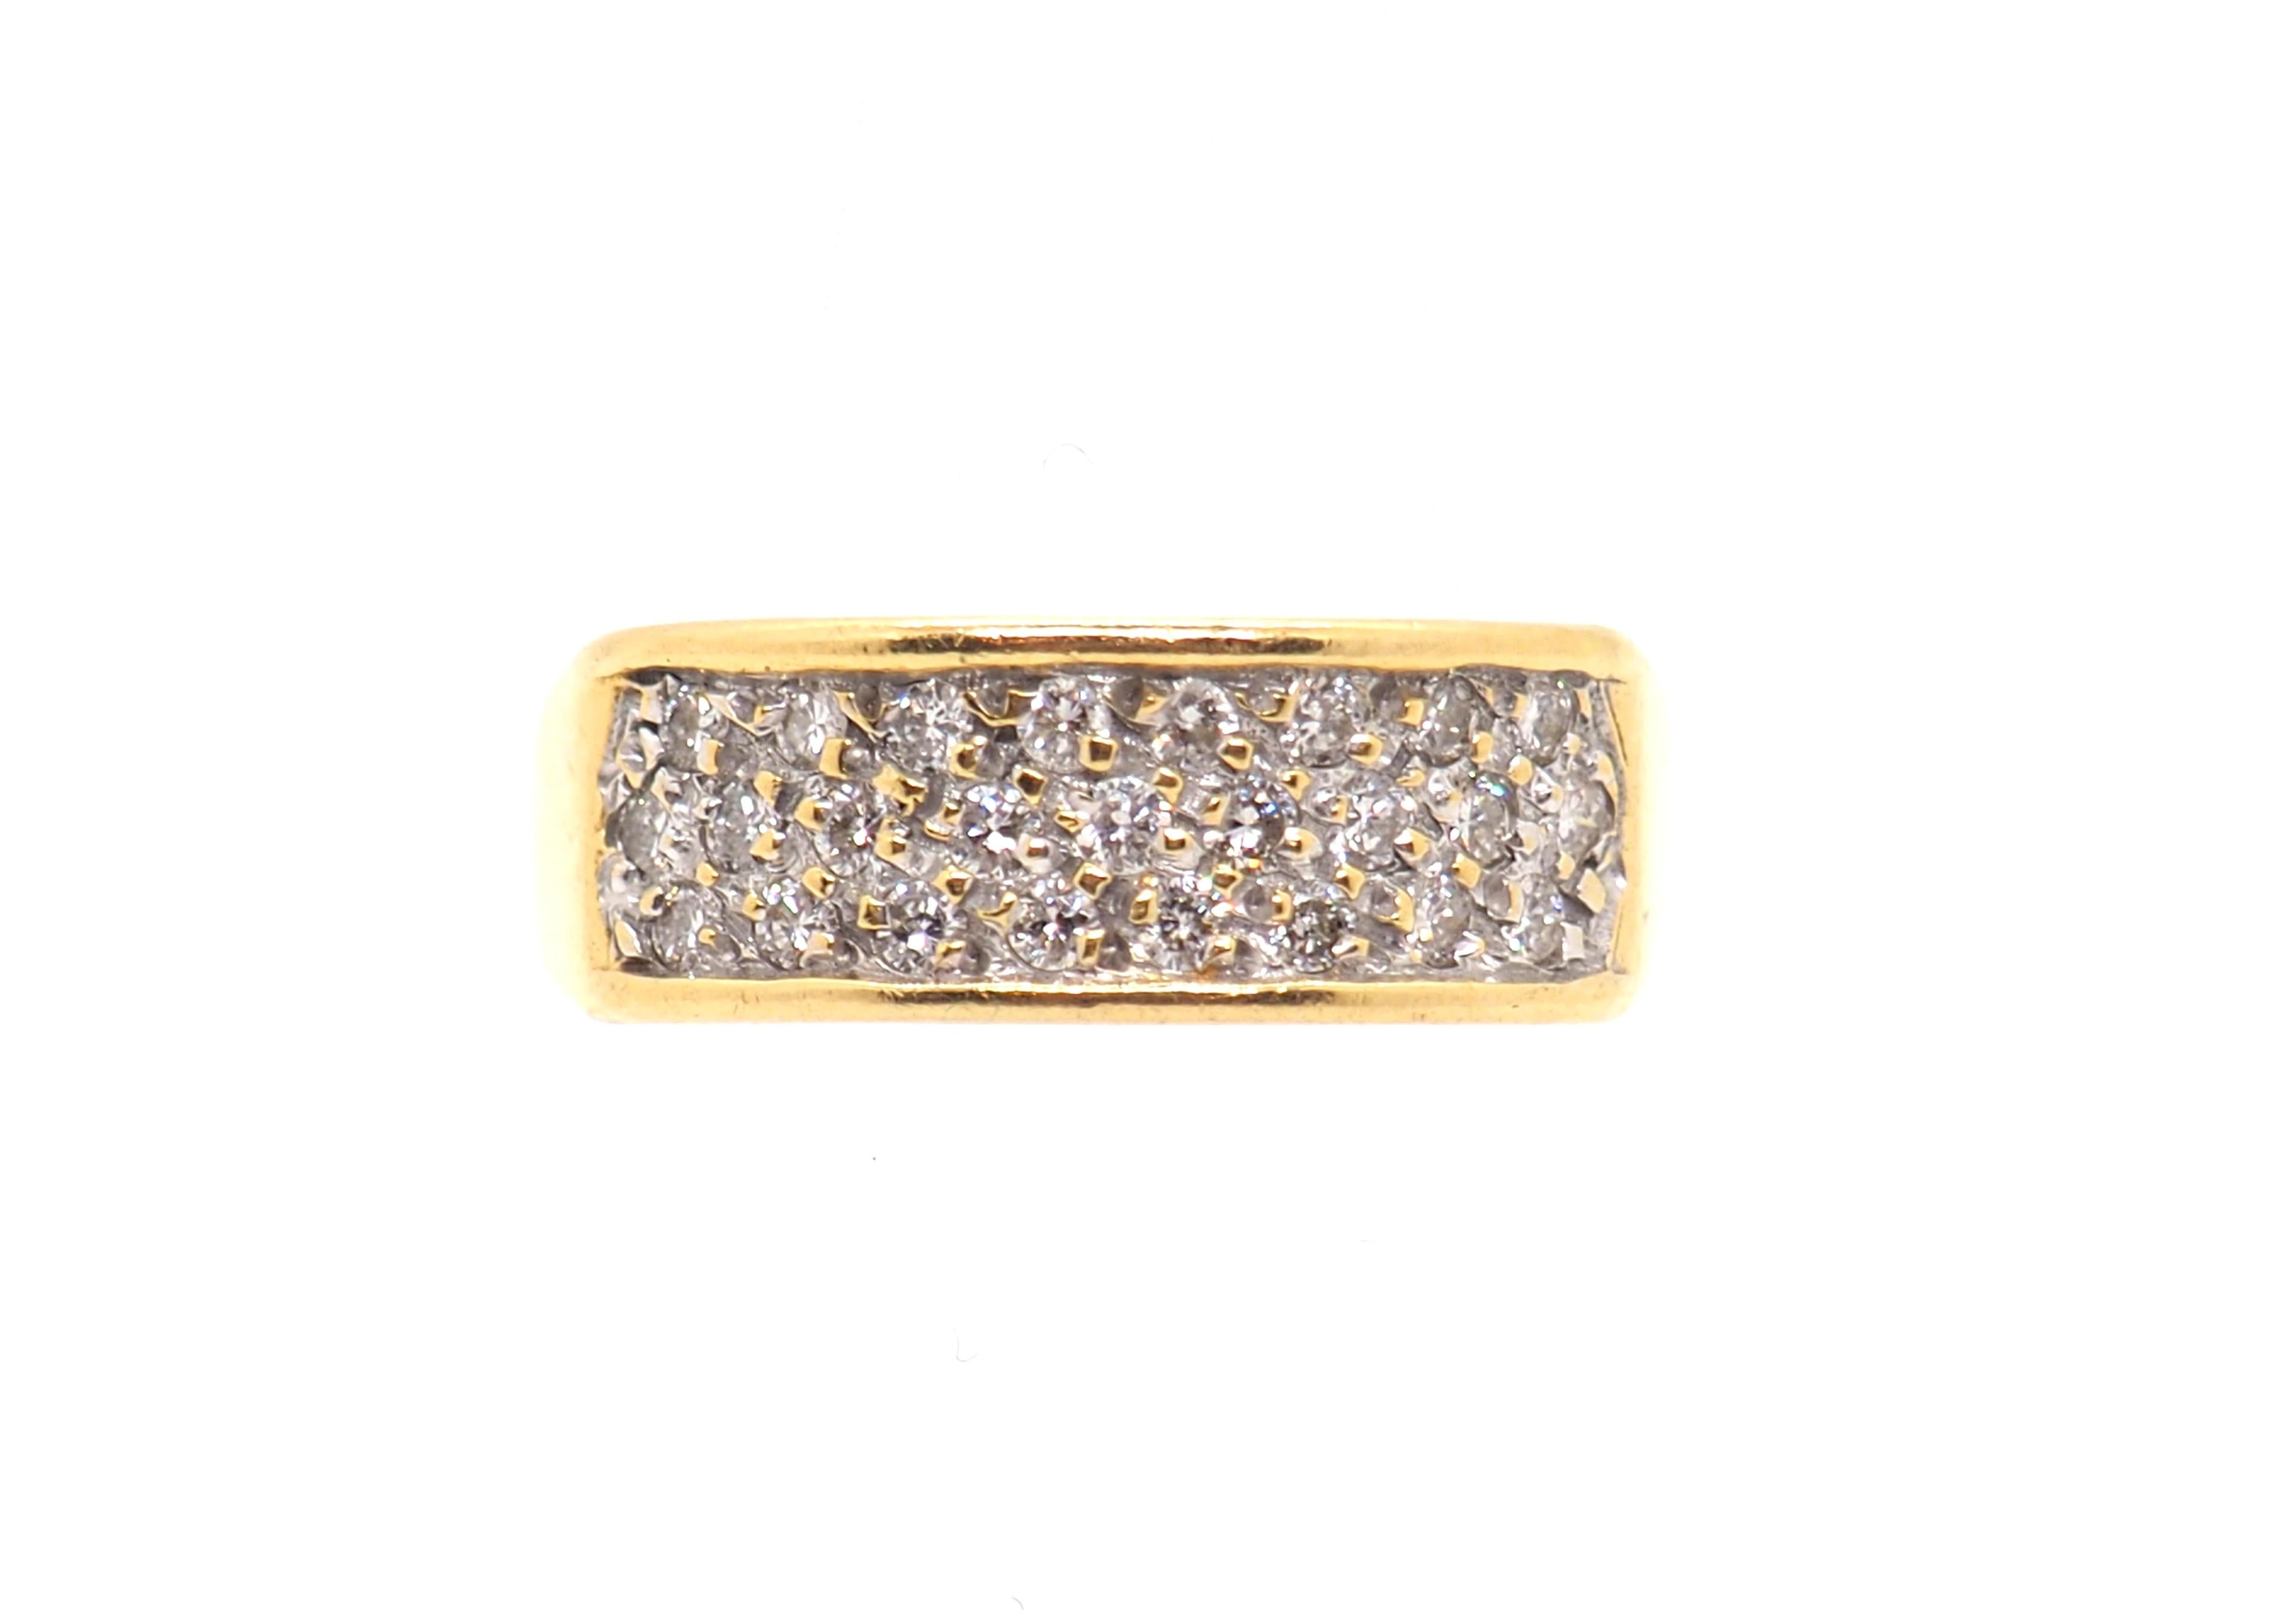 Elevate your style with our exquisite 18k yellow gold ring, adorned with 24 shimmering round cut diamonds totaling approximately 0.24 carats. This ring exudes elegance and sophistication, making it the perfect accessory for both everyday wear and